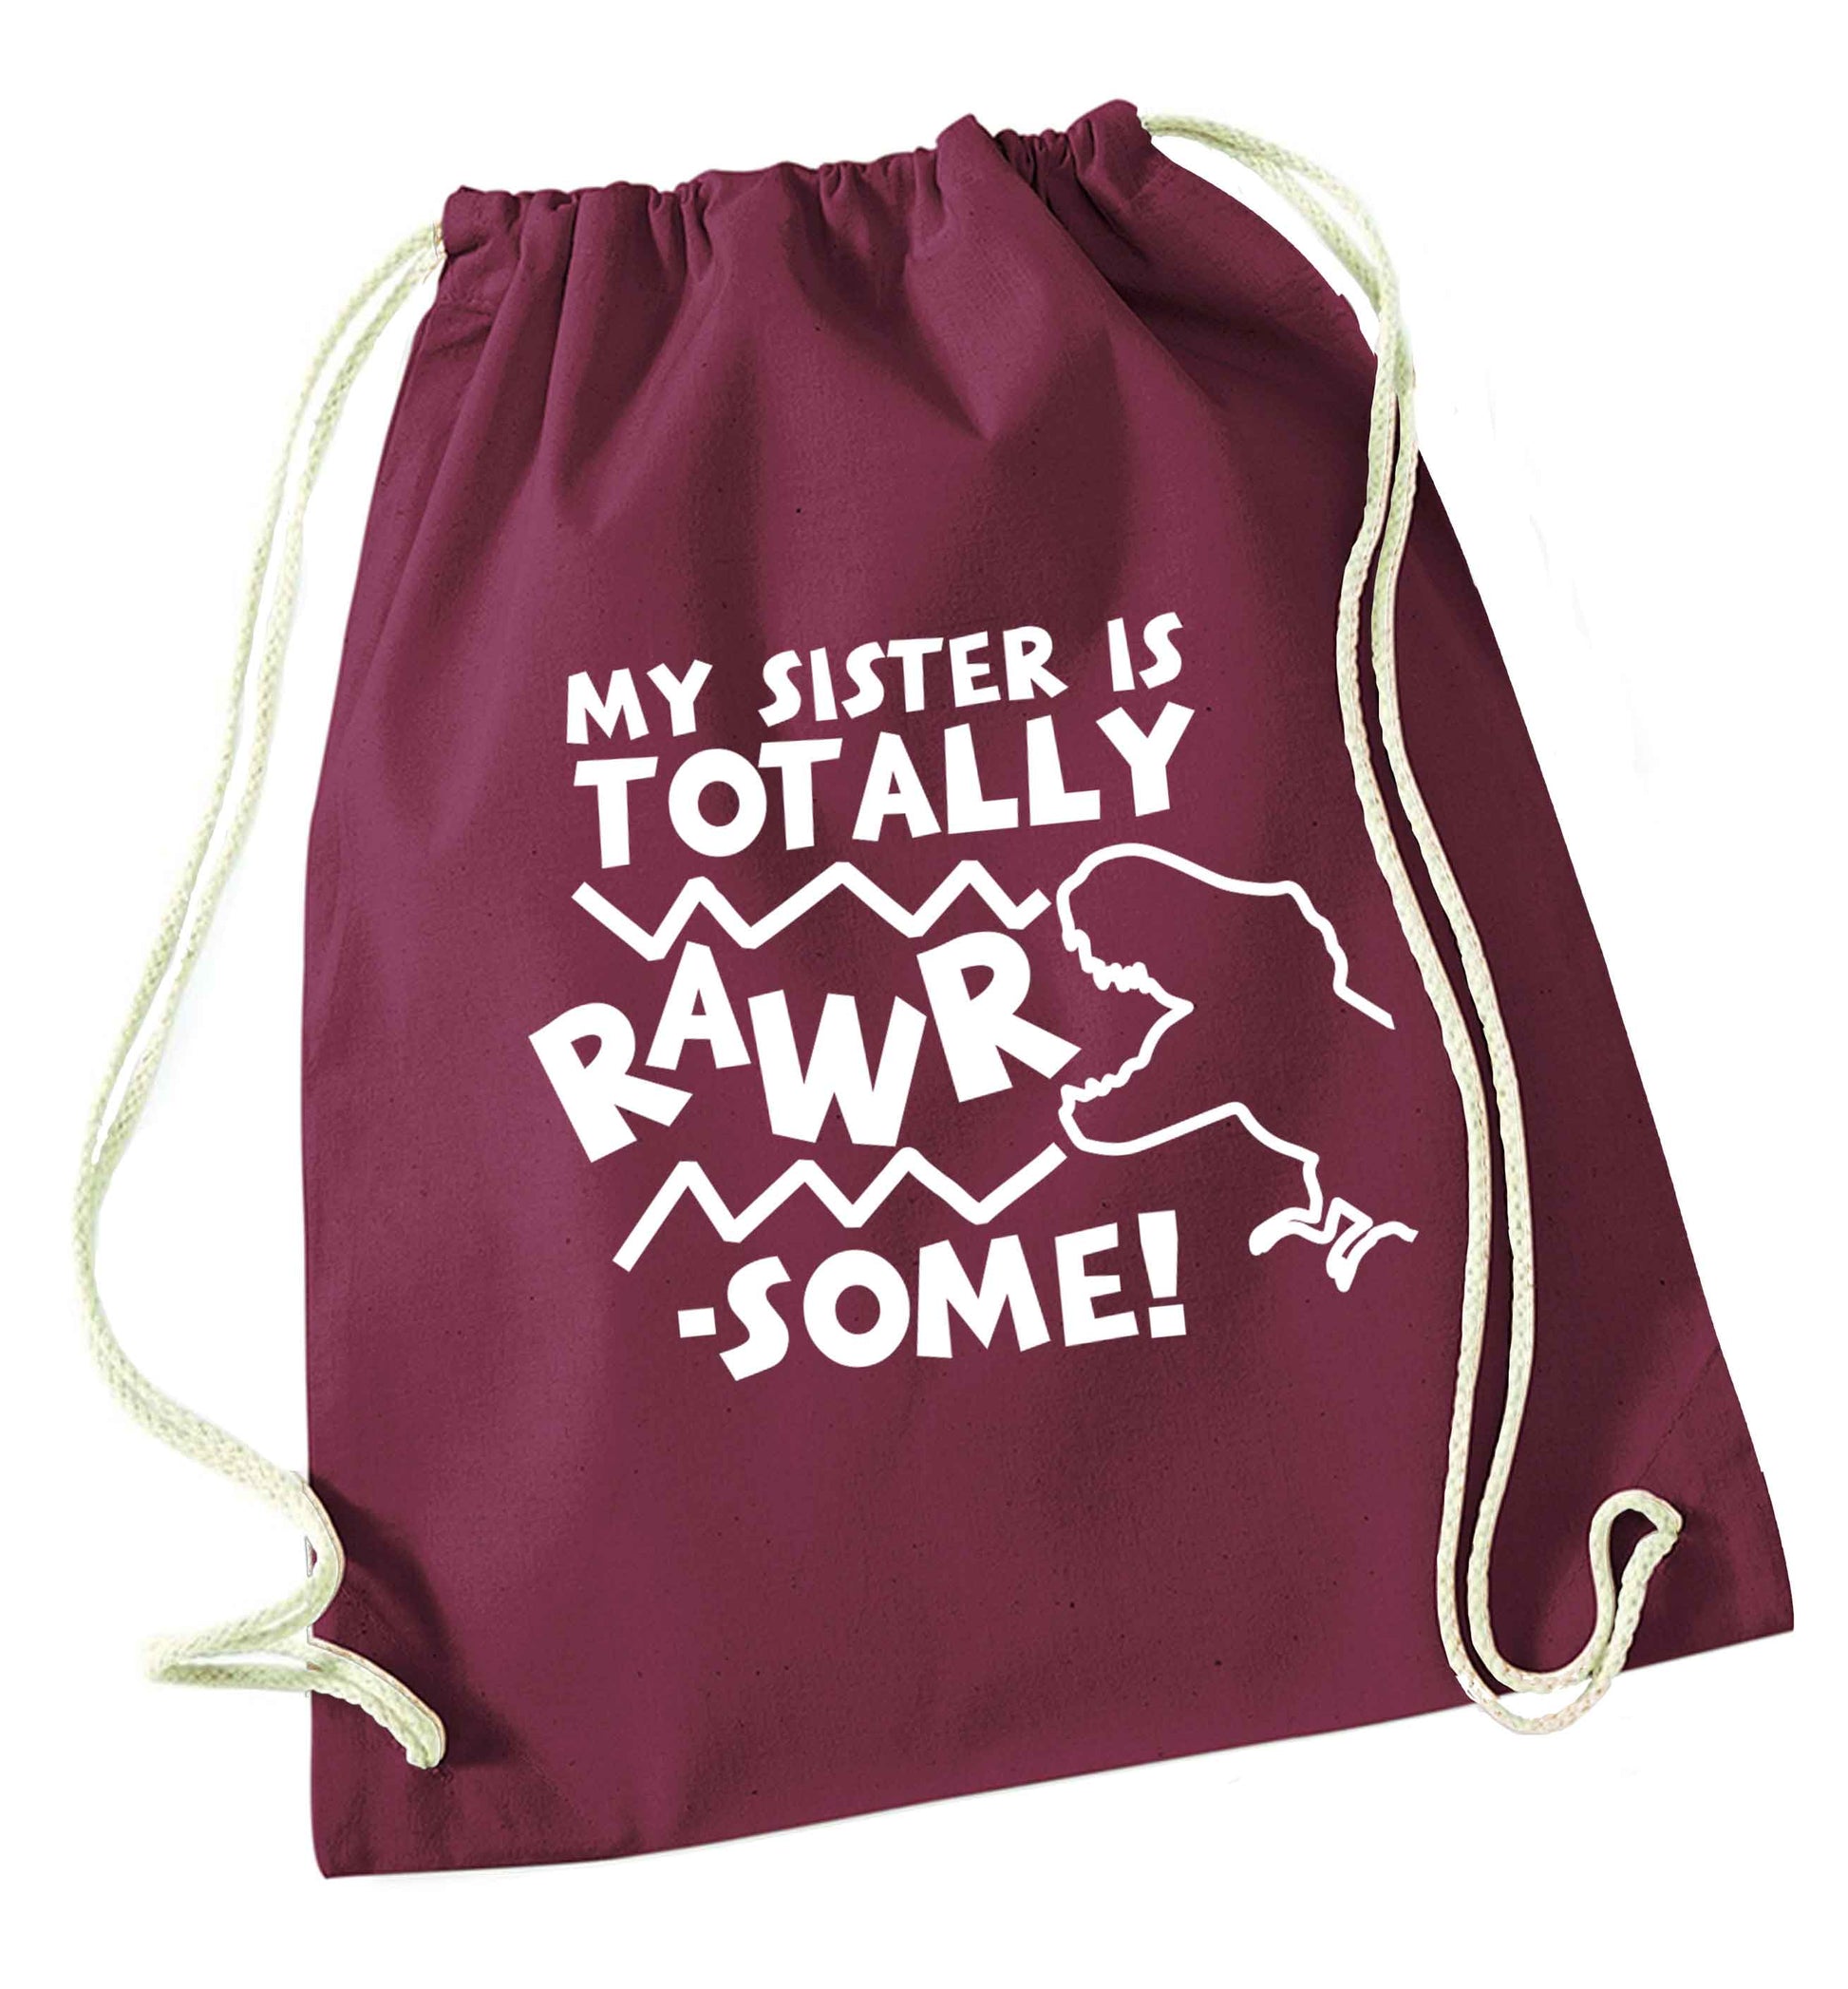 My sister is totally rawrsome maroon drawstring bag